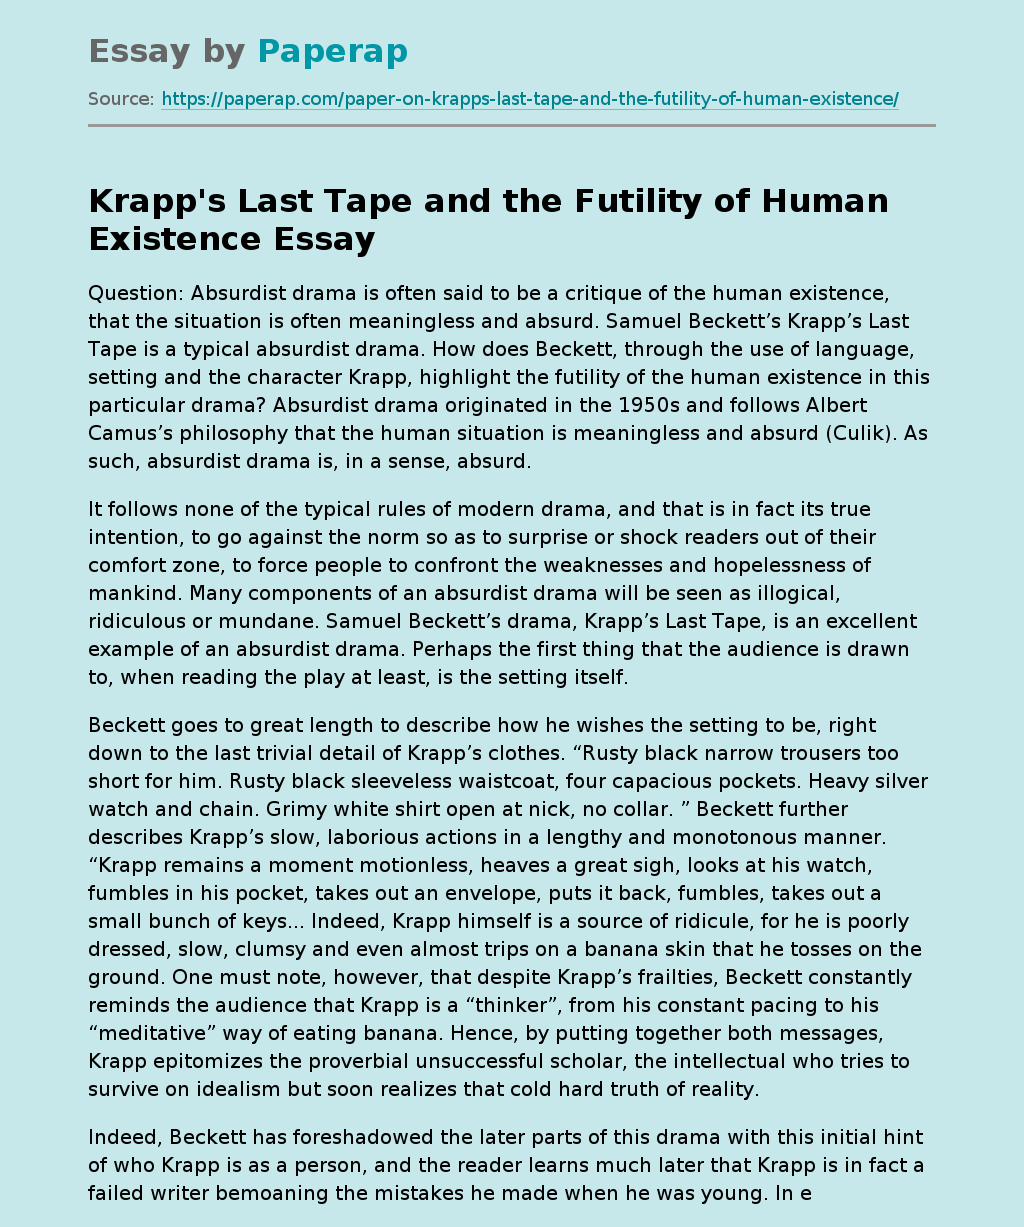 Krapp's Last Tape and the Futility of Human Existence